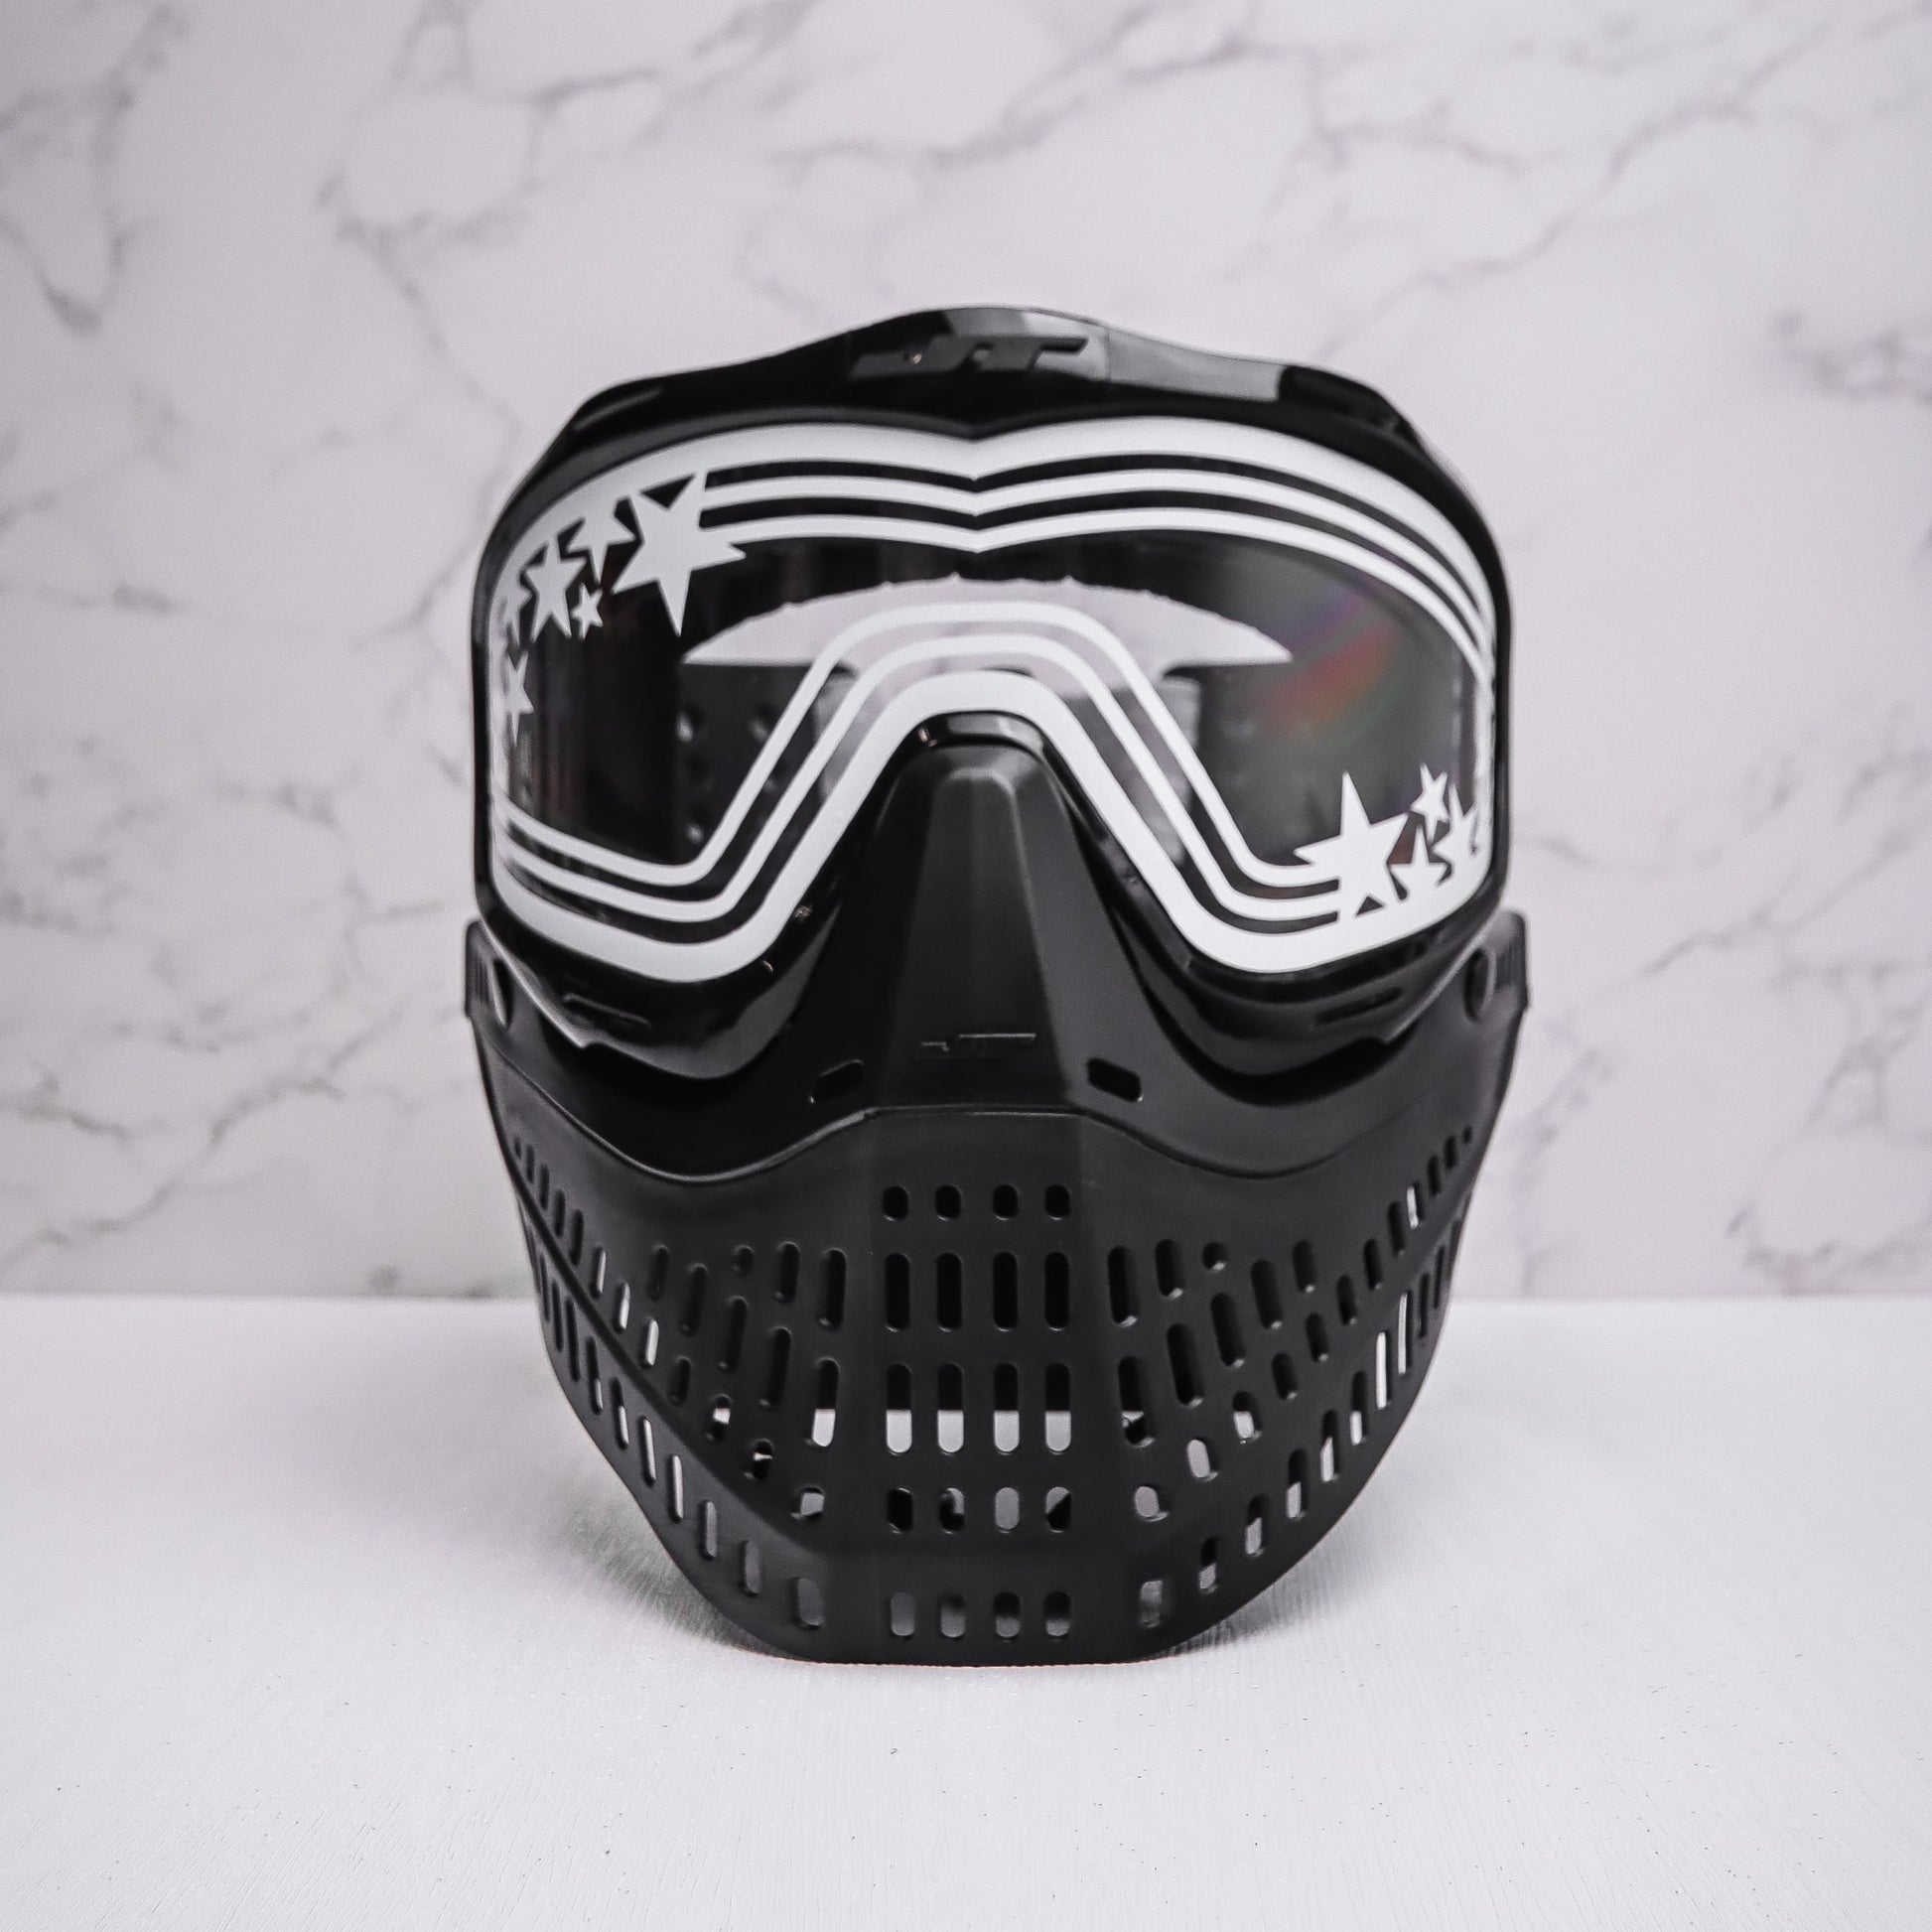 JT Spectra Proshield Thermal Lens Paintball Goggle Black W